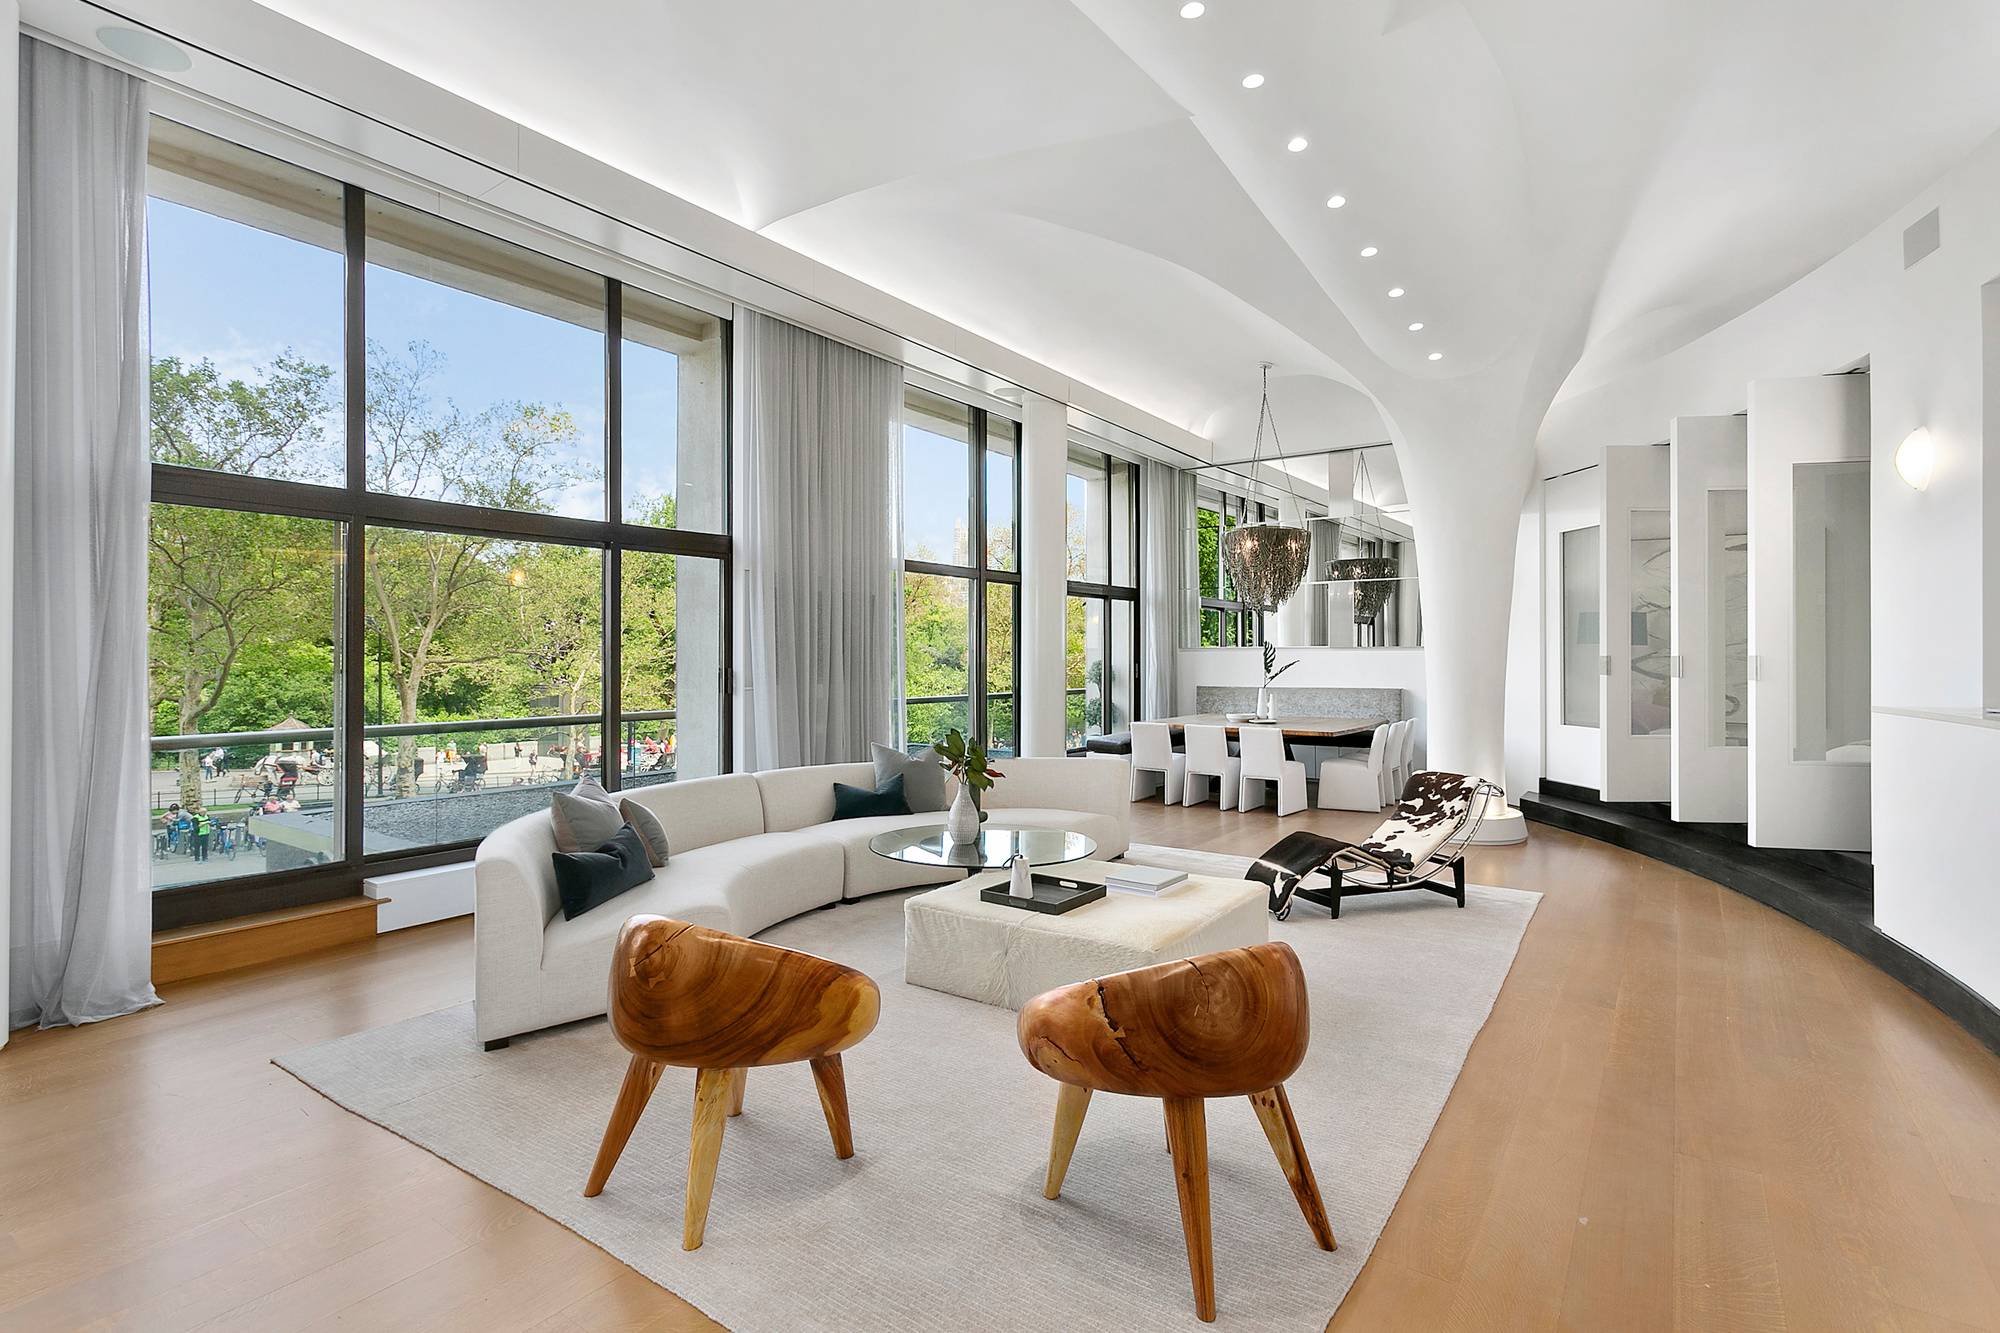 Formerly the grand ballroom of the Barbizon Plaza Hotel, this stunning residence features 50 linear feet on Central Park with nearly 3000sf of living space, plus an additional 175sf planting ...